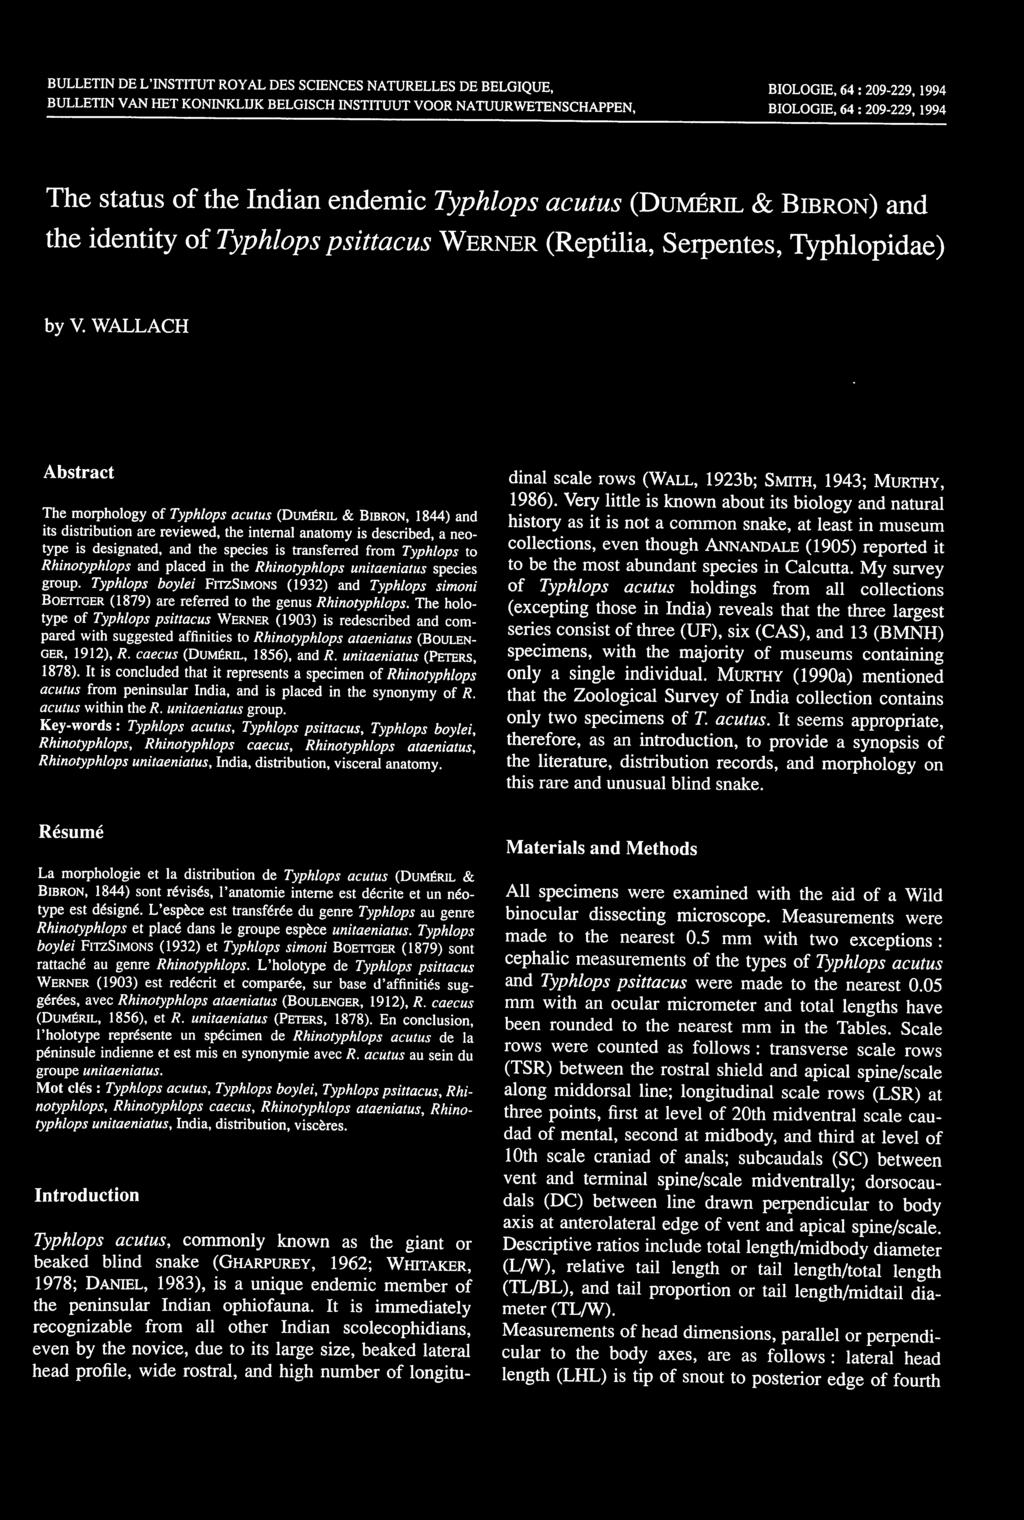 WALLACH Abstract The morphology of Typhlops acutus (D UMERIL & BIBRON, 1844) and its distribution are reviewed, the internal anatomy is described, a neotype is designated, and the species is